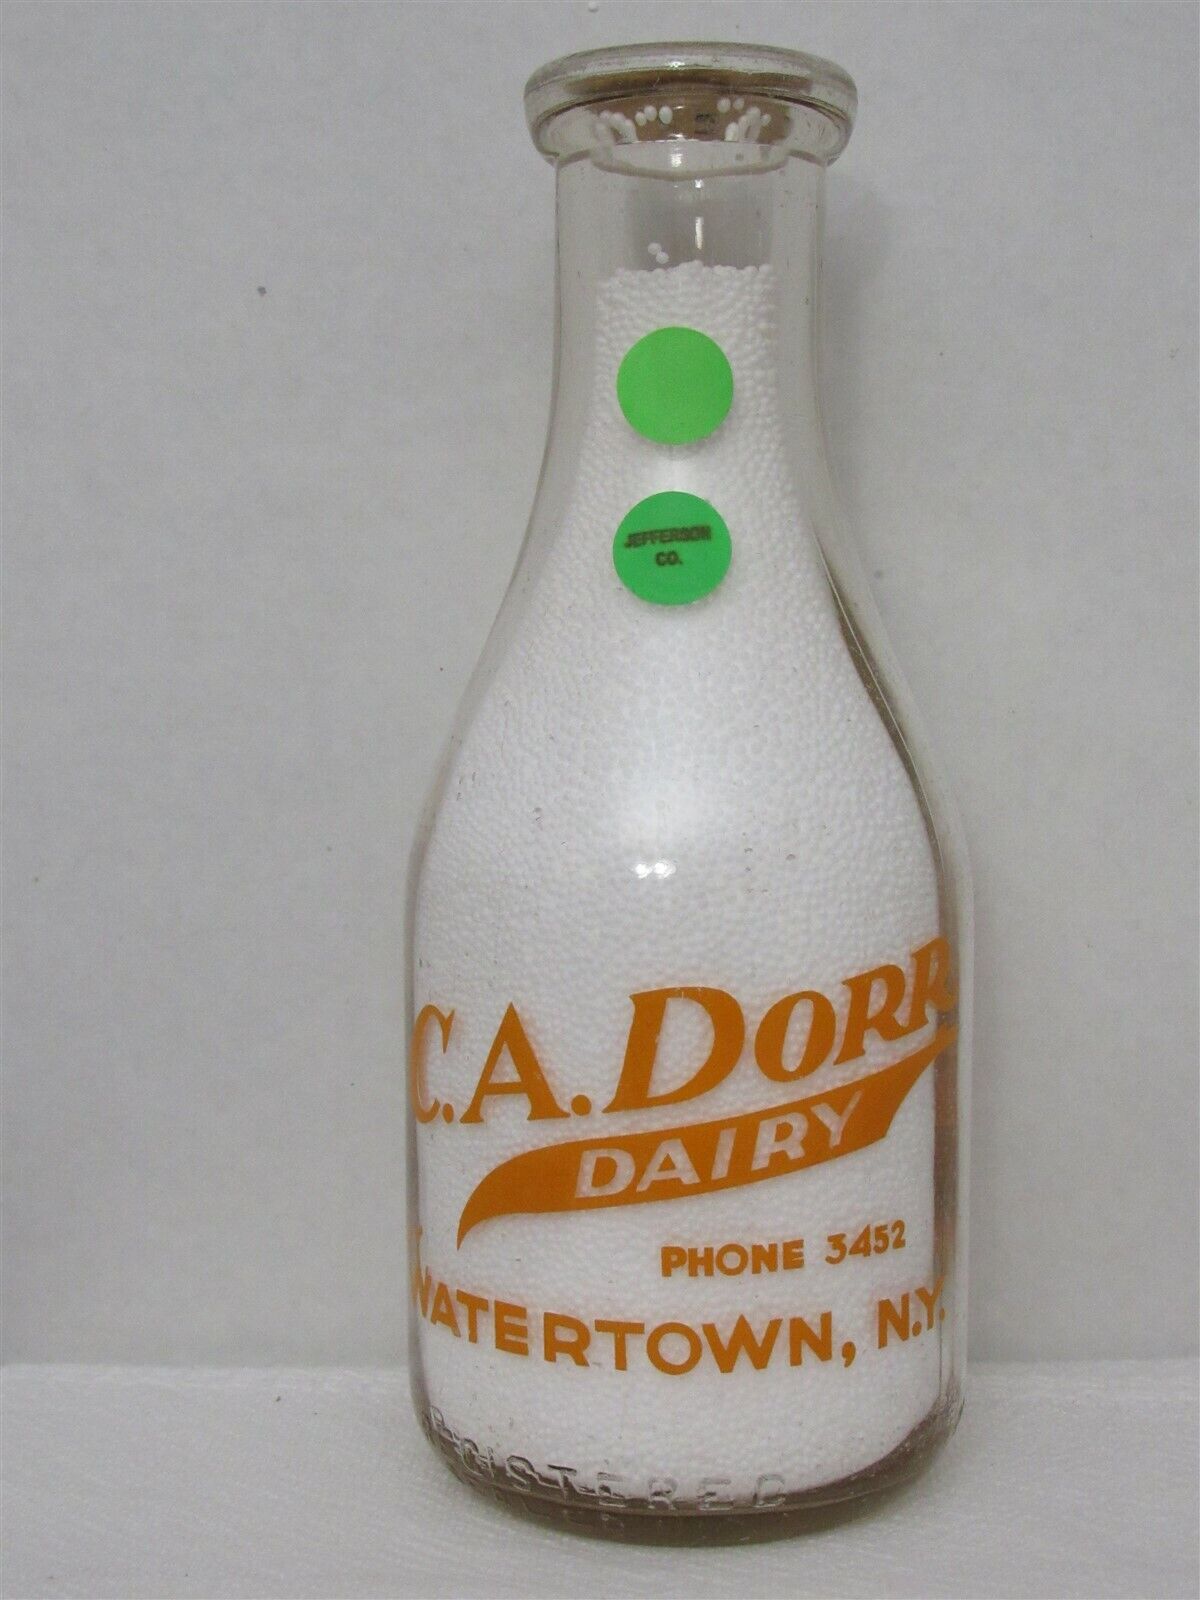 TRPQ Milk Bottle C A Dorr Dairy Watertown NY JEFFERSON COUNTY 1942 PERFECT FOOD